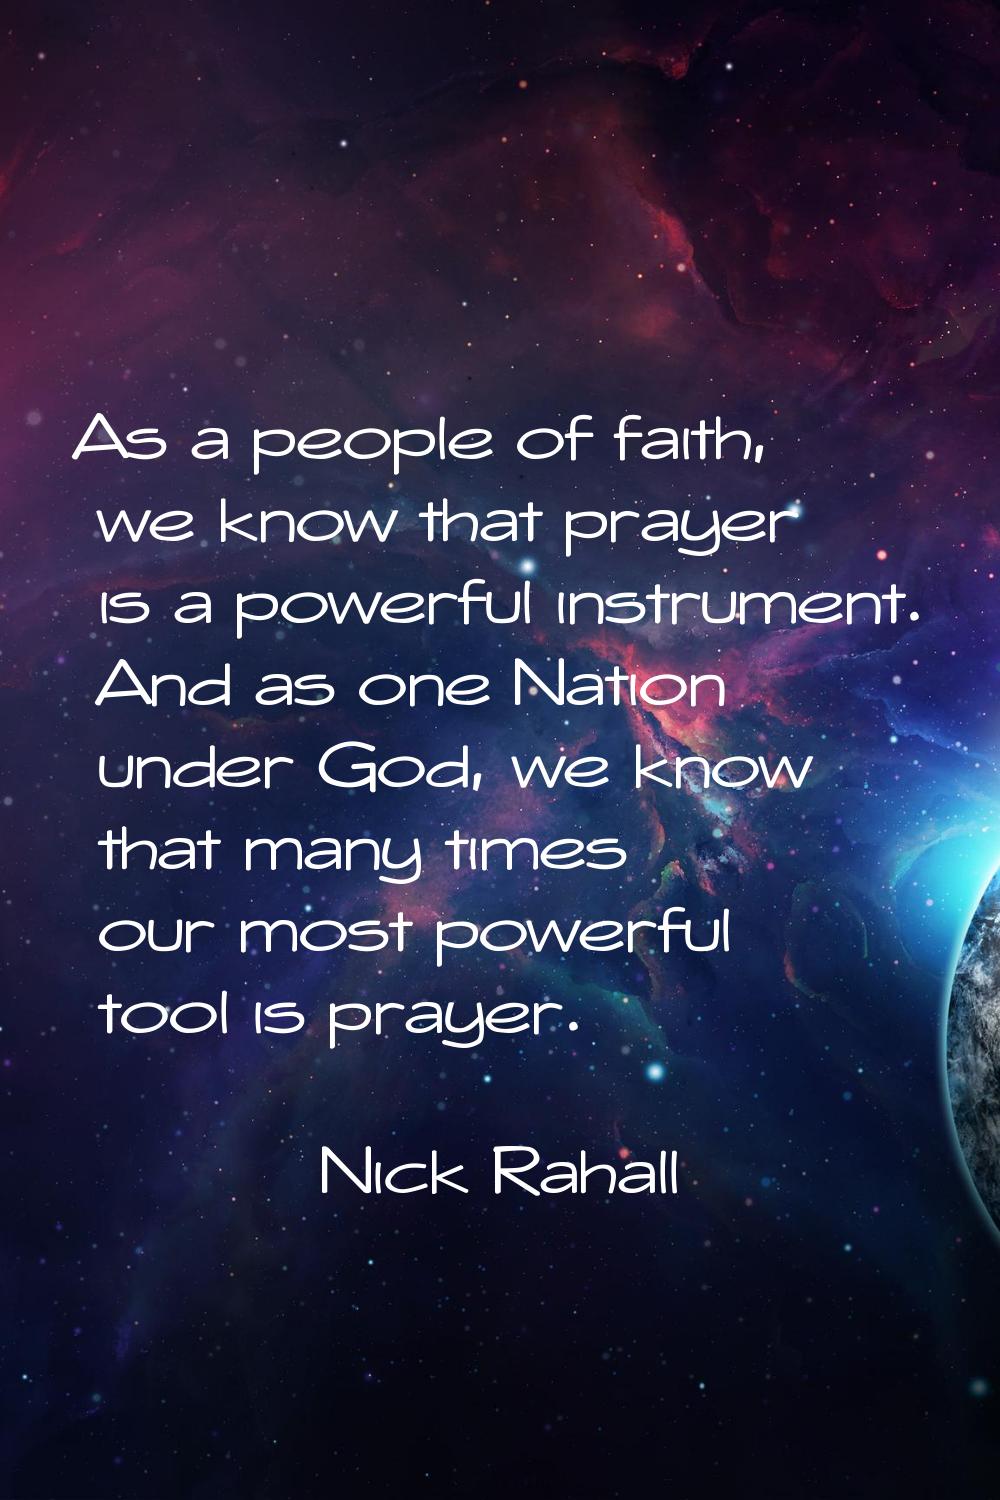 As a people of faith, we know that prayer is a powerful instrument. And as one Nation under God, we